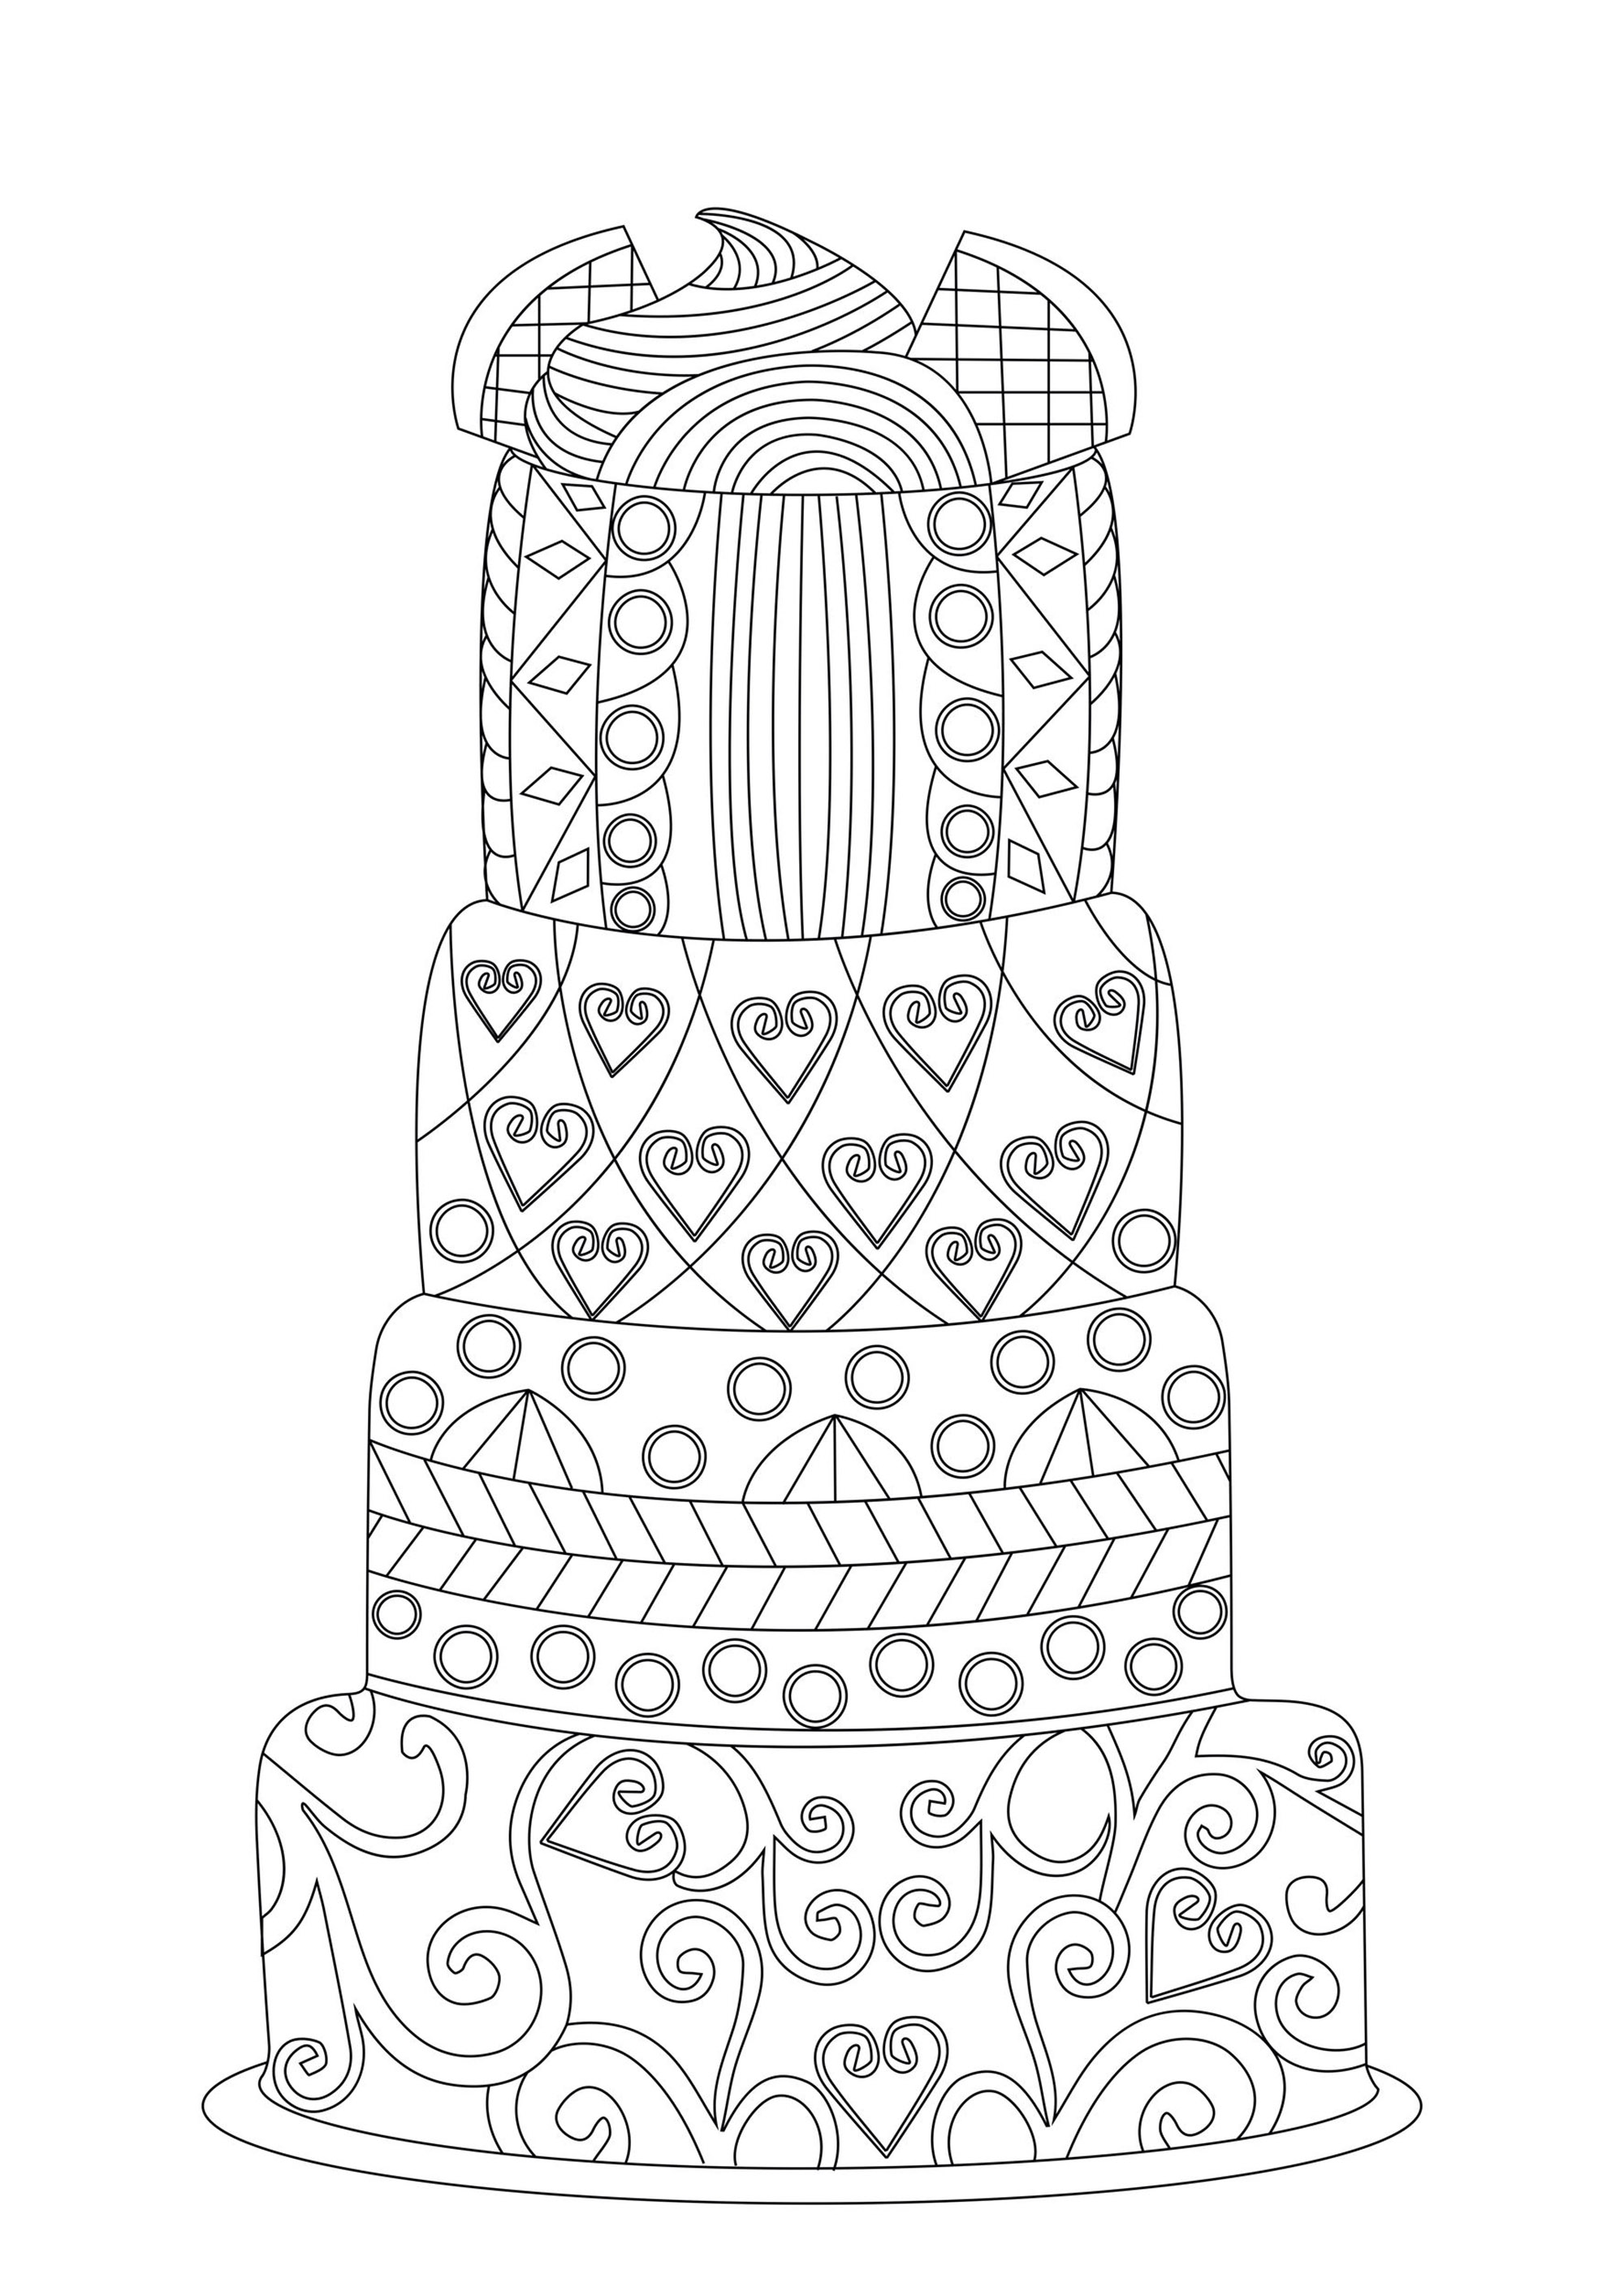 Big lacy cake - Cupcakes Adult Coloring Pages